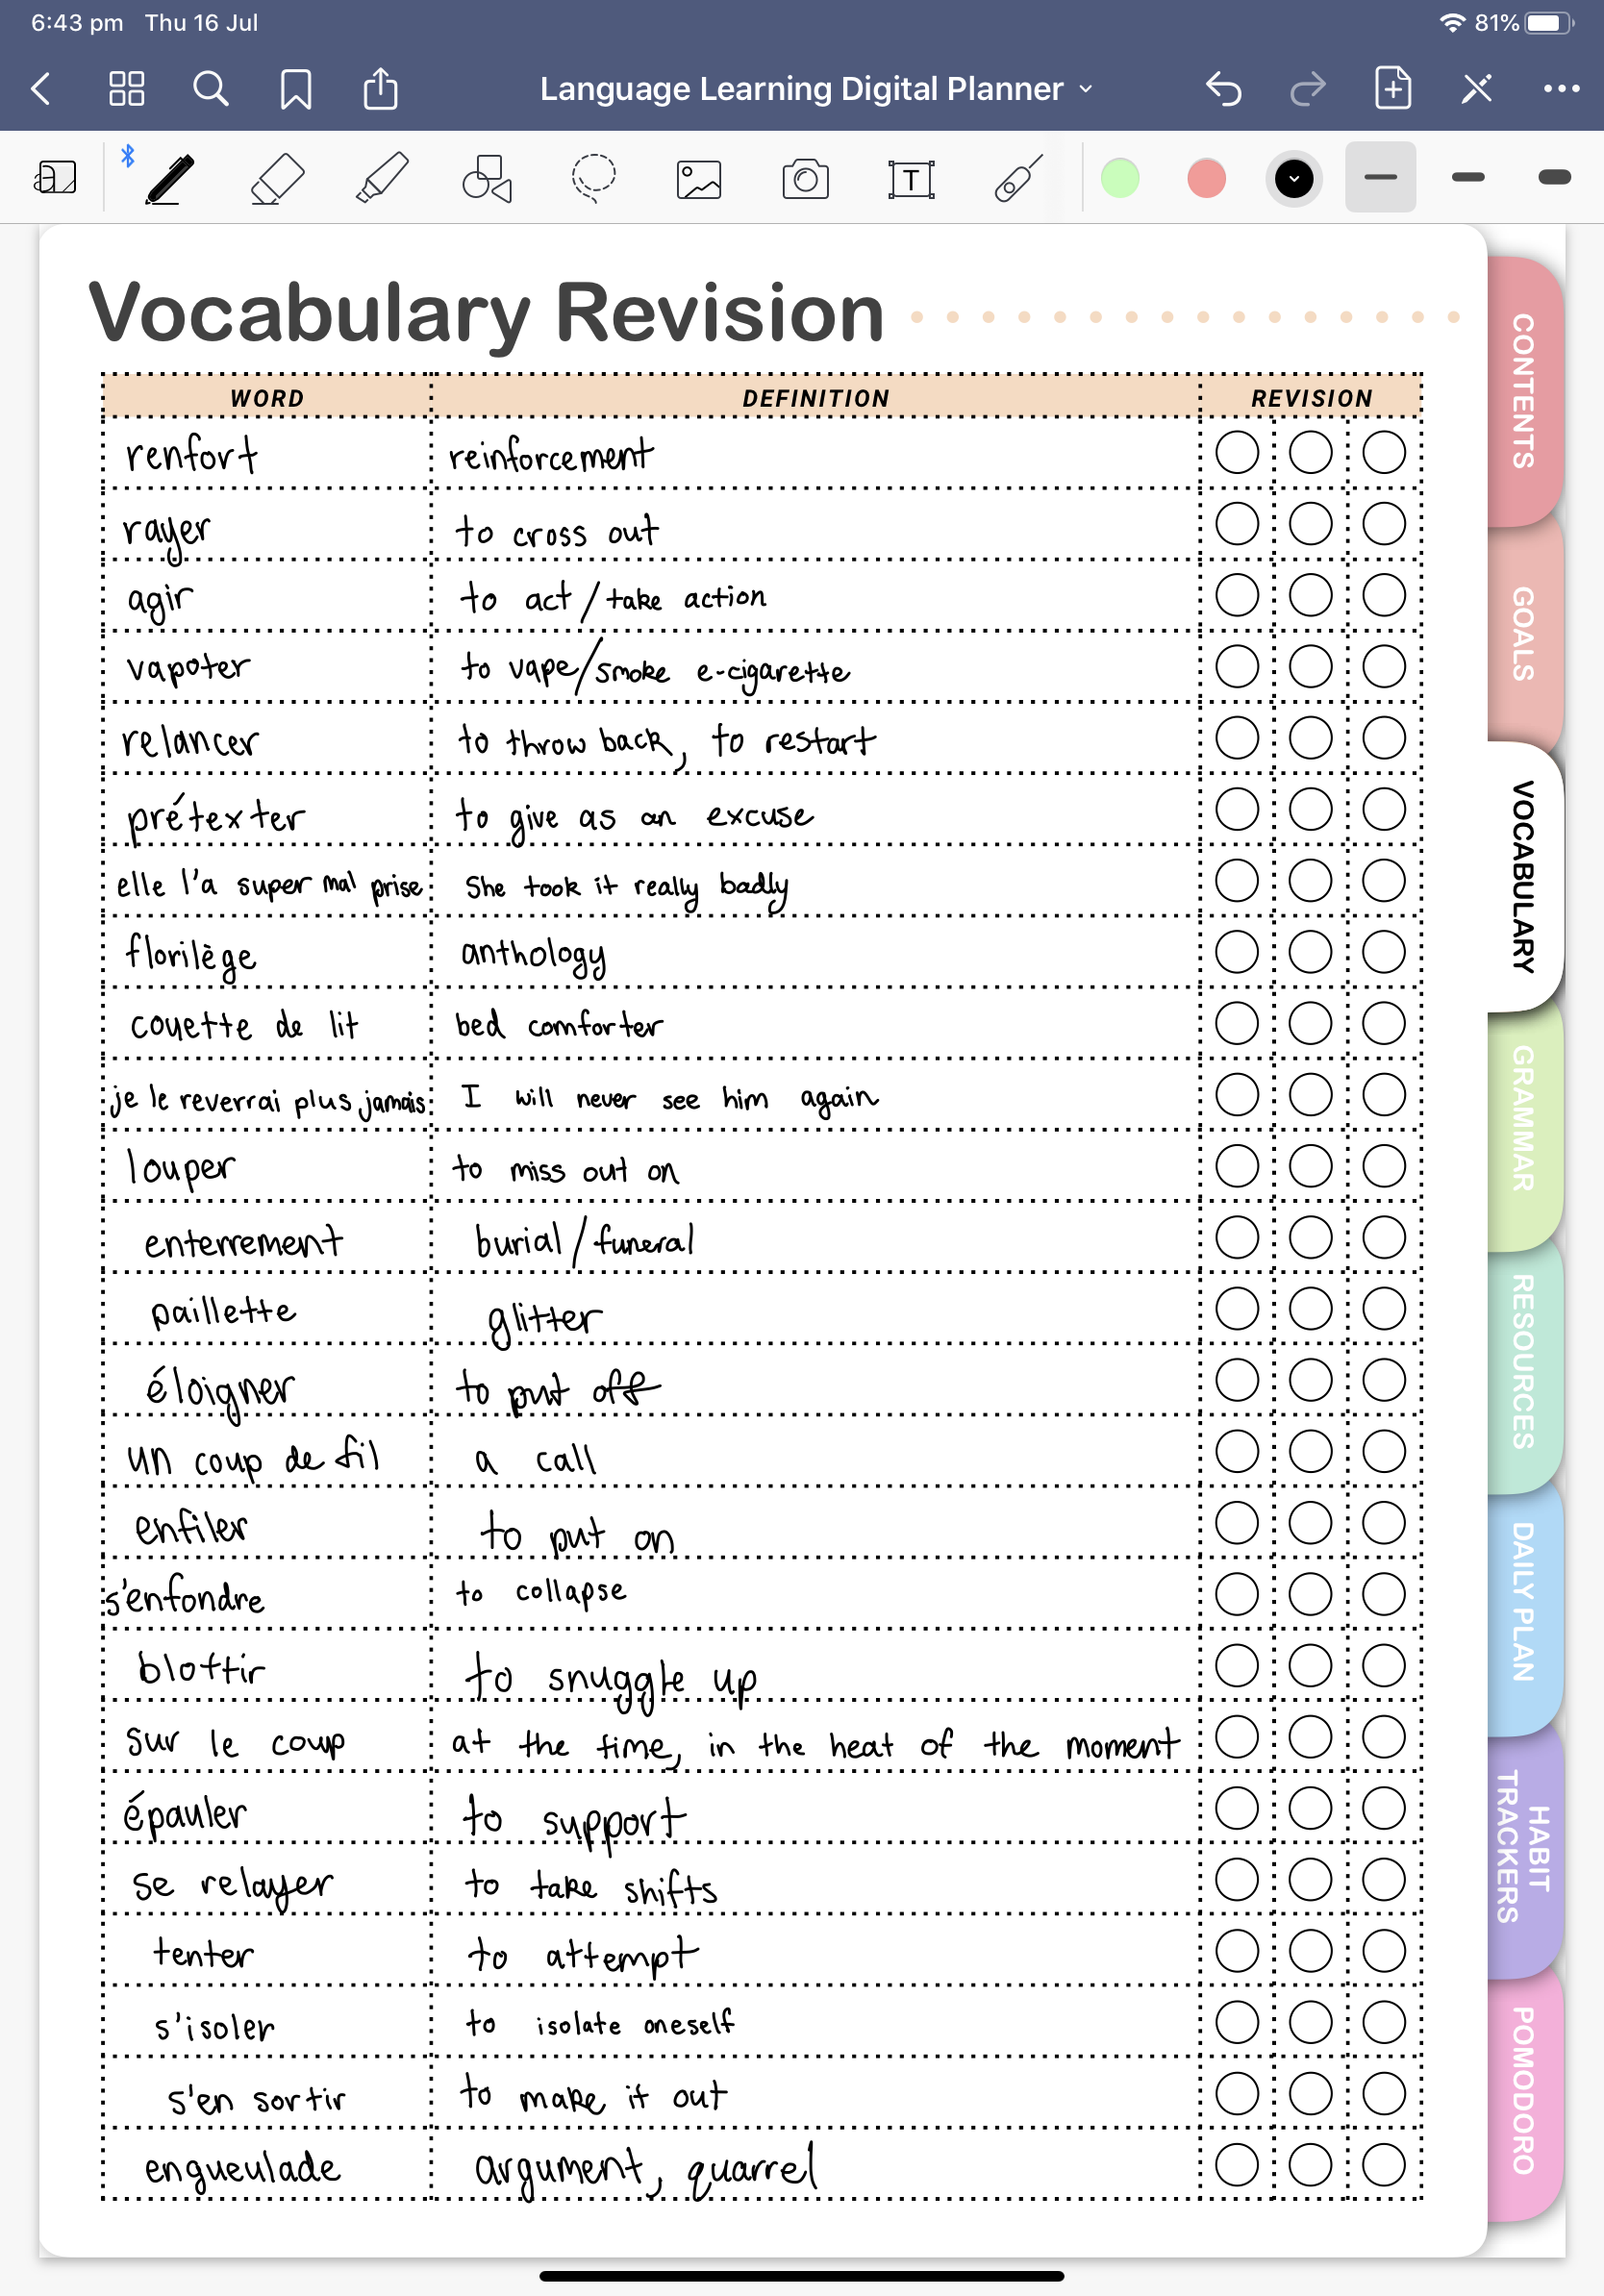 Digital language learning planner - vocabulary revision